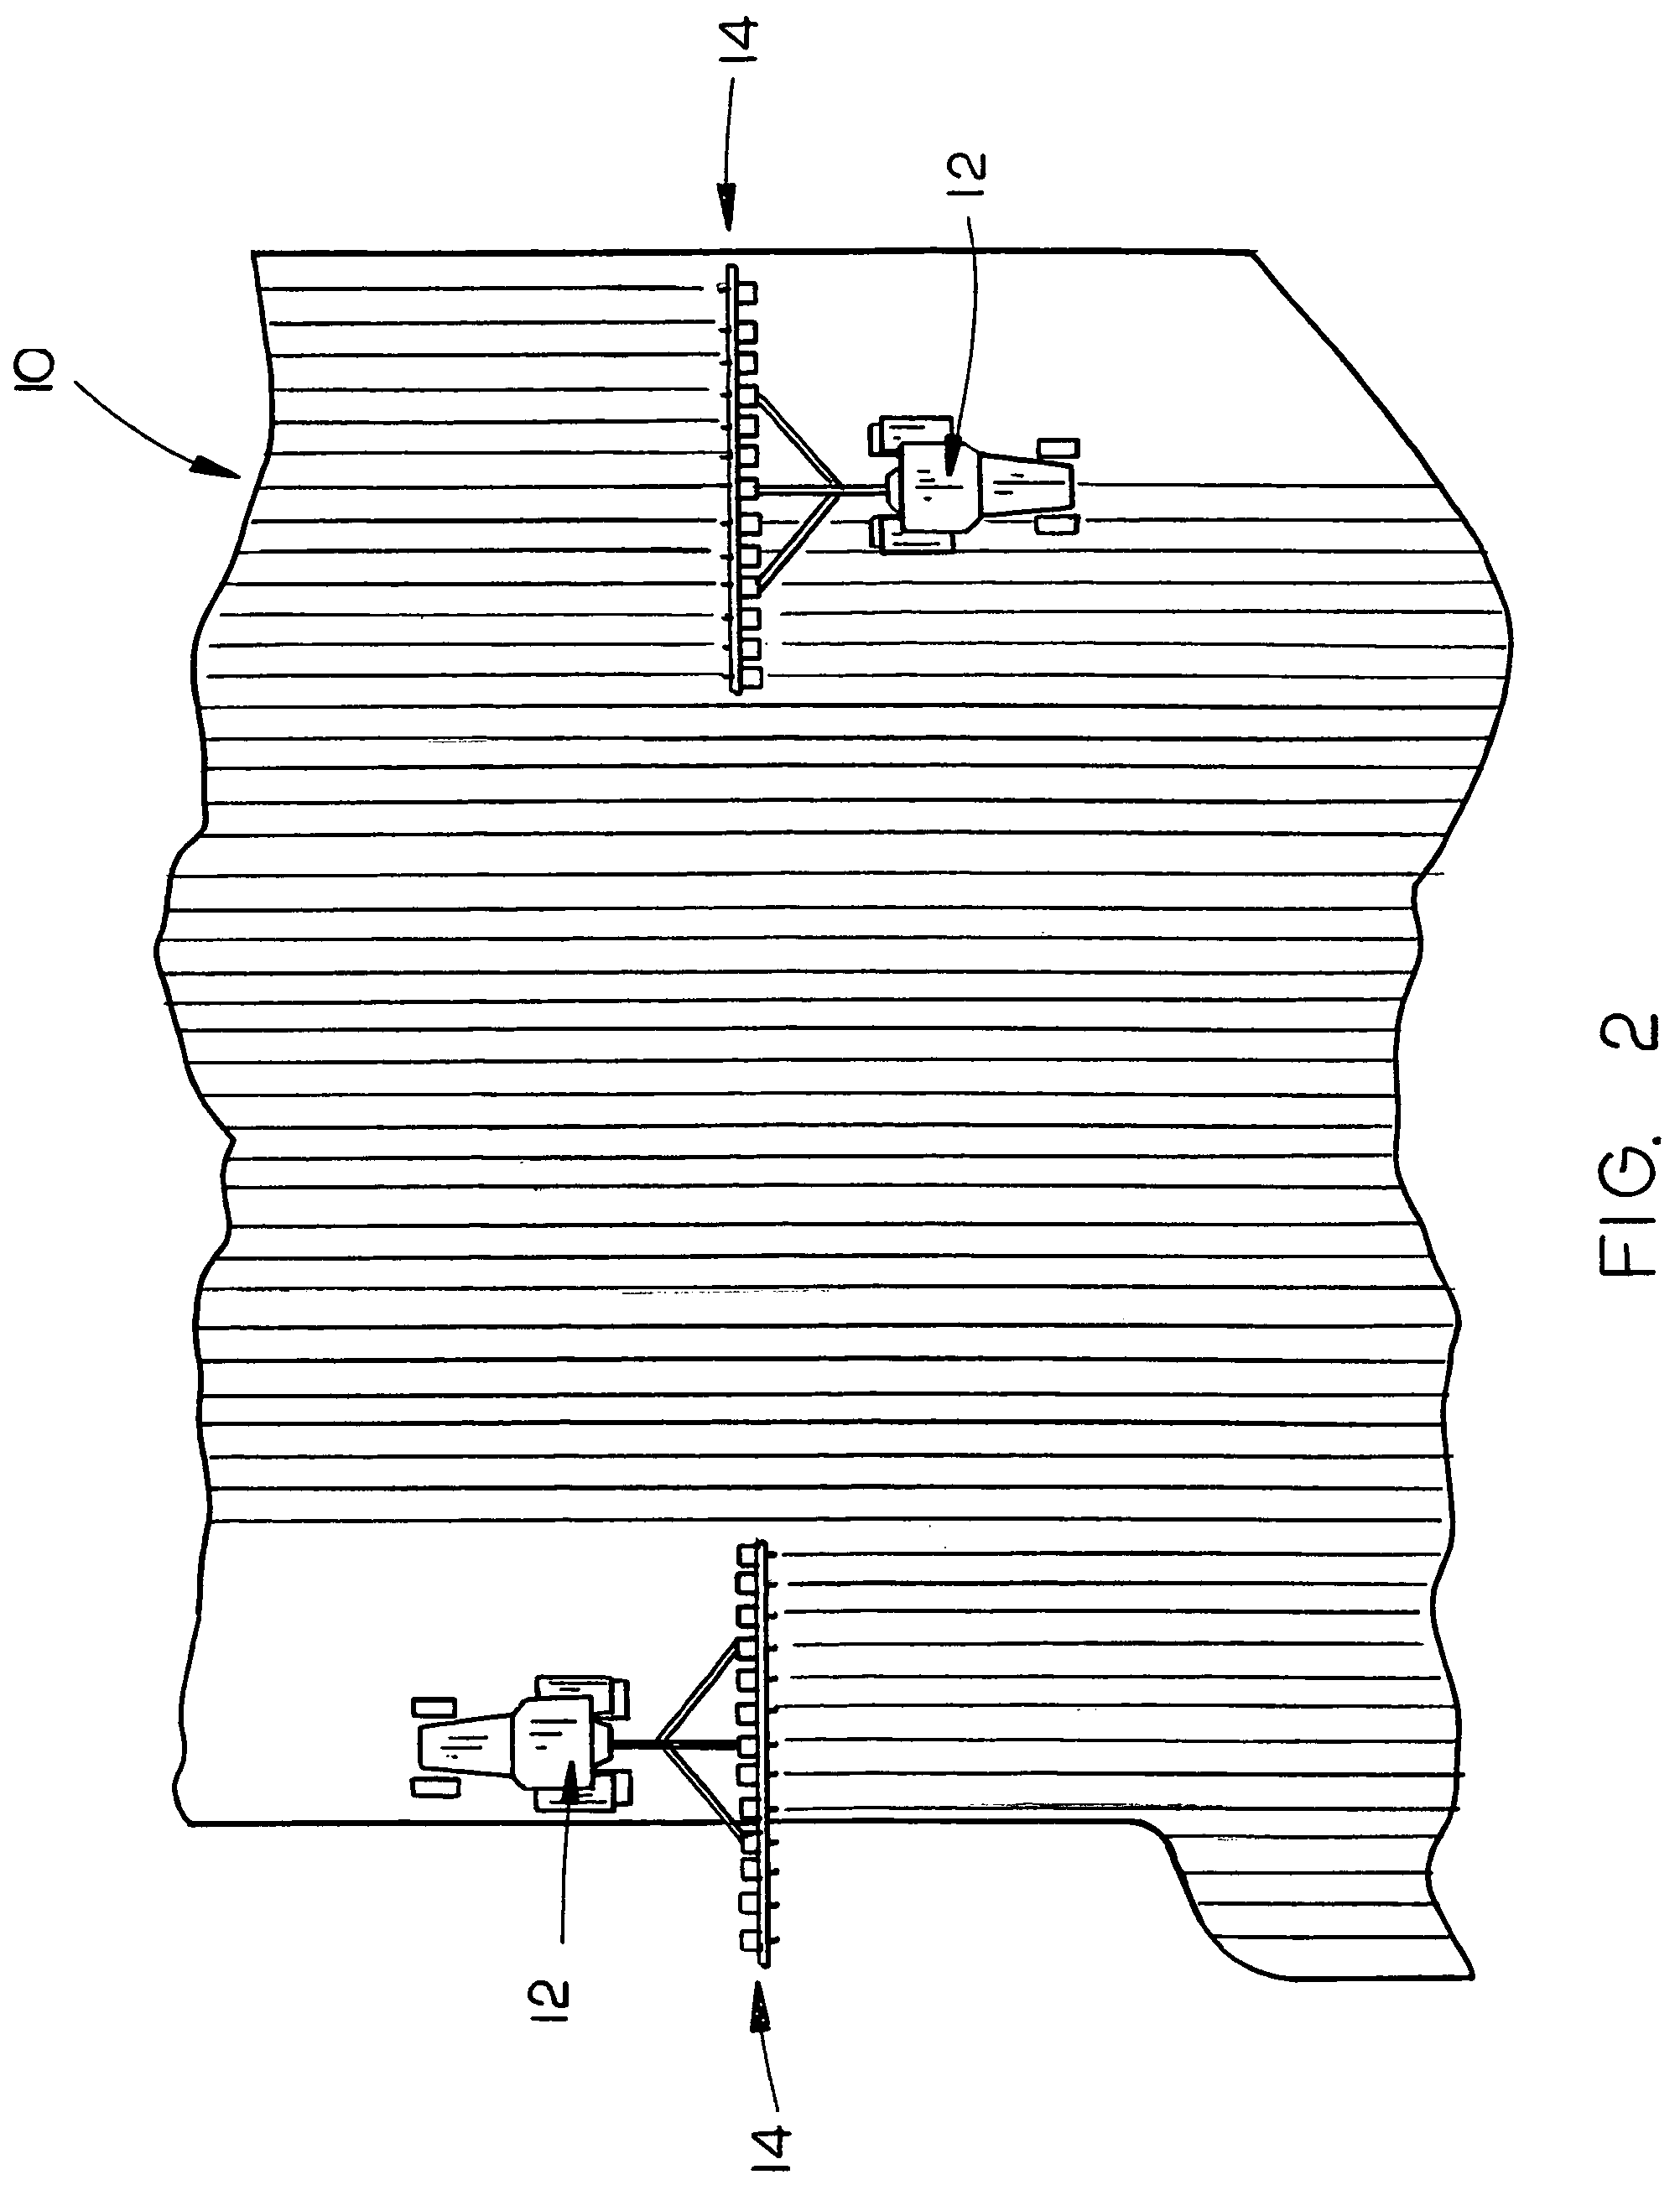 Individual row rate control of farm implements to adjust the volume of crop inputs across wide implements in irregularly shaped or contour areas of chemical application, planting or seeding